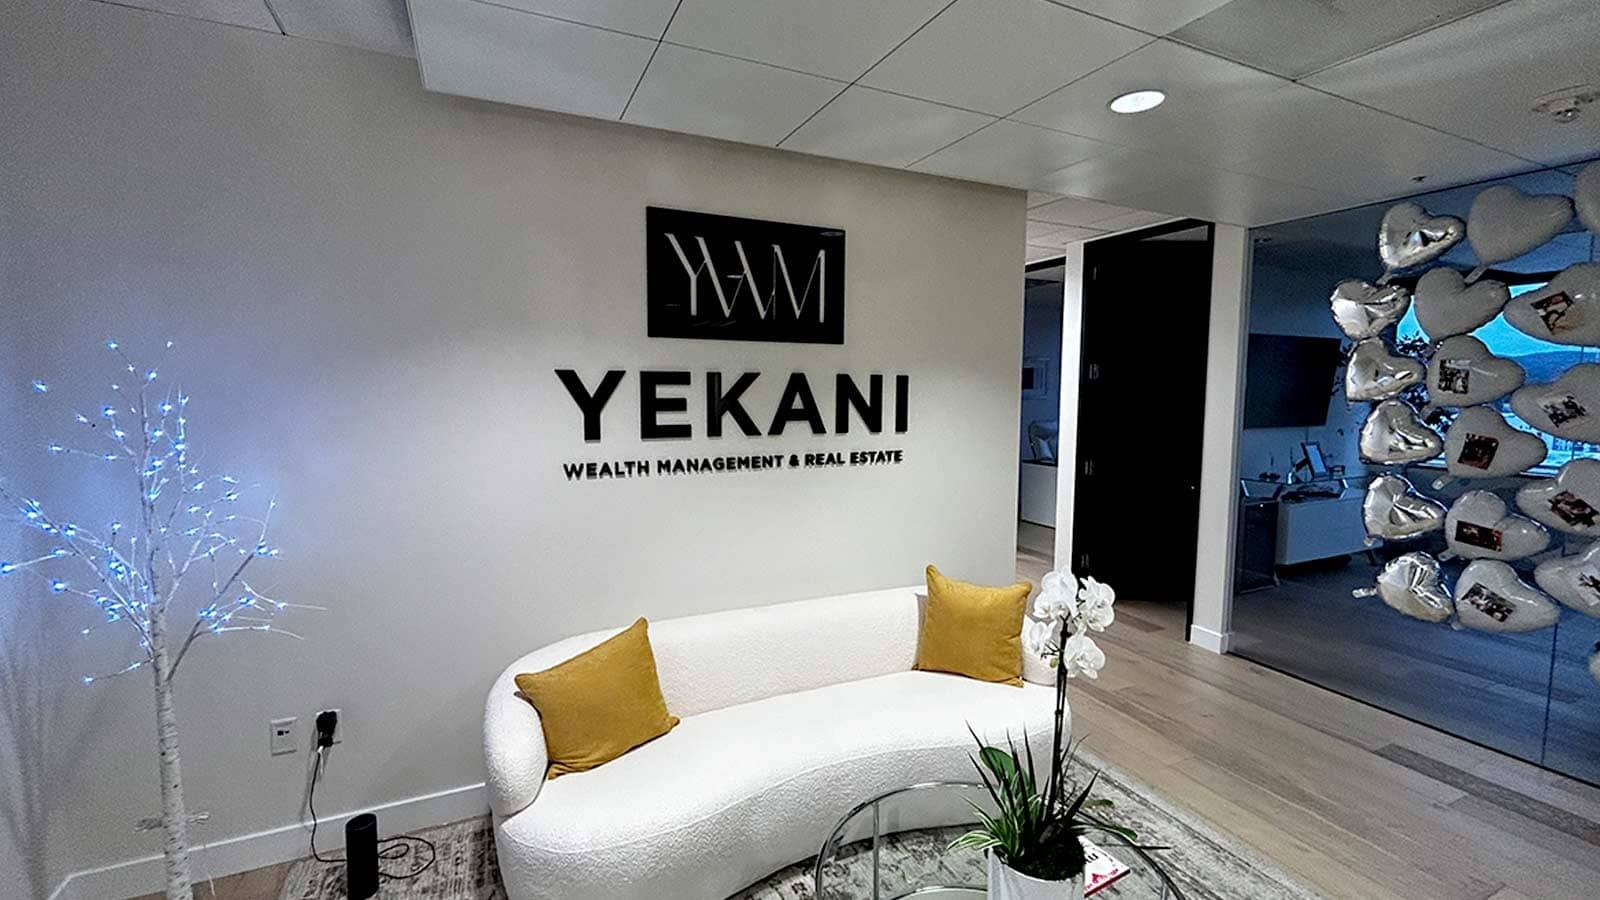 Yekani Wealth Management & Real Estate 3D sign on the wall